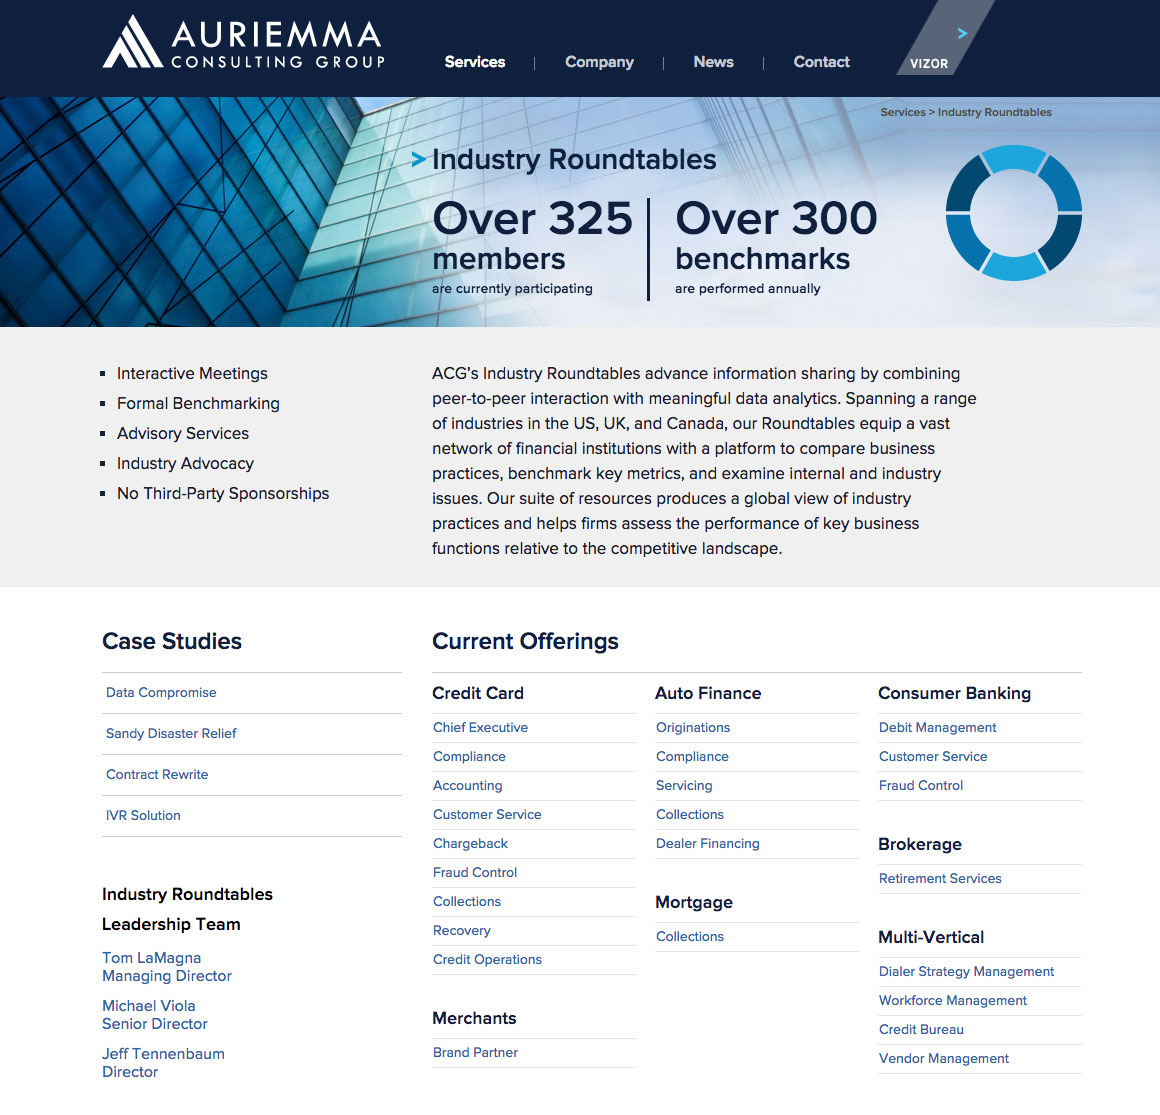 Auriemma Consulting Group Website